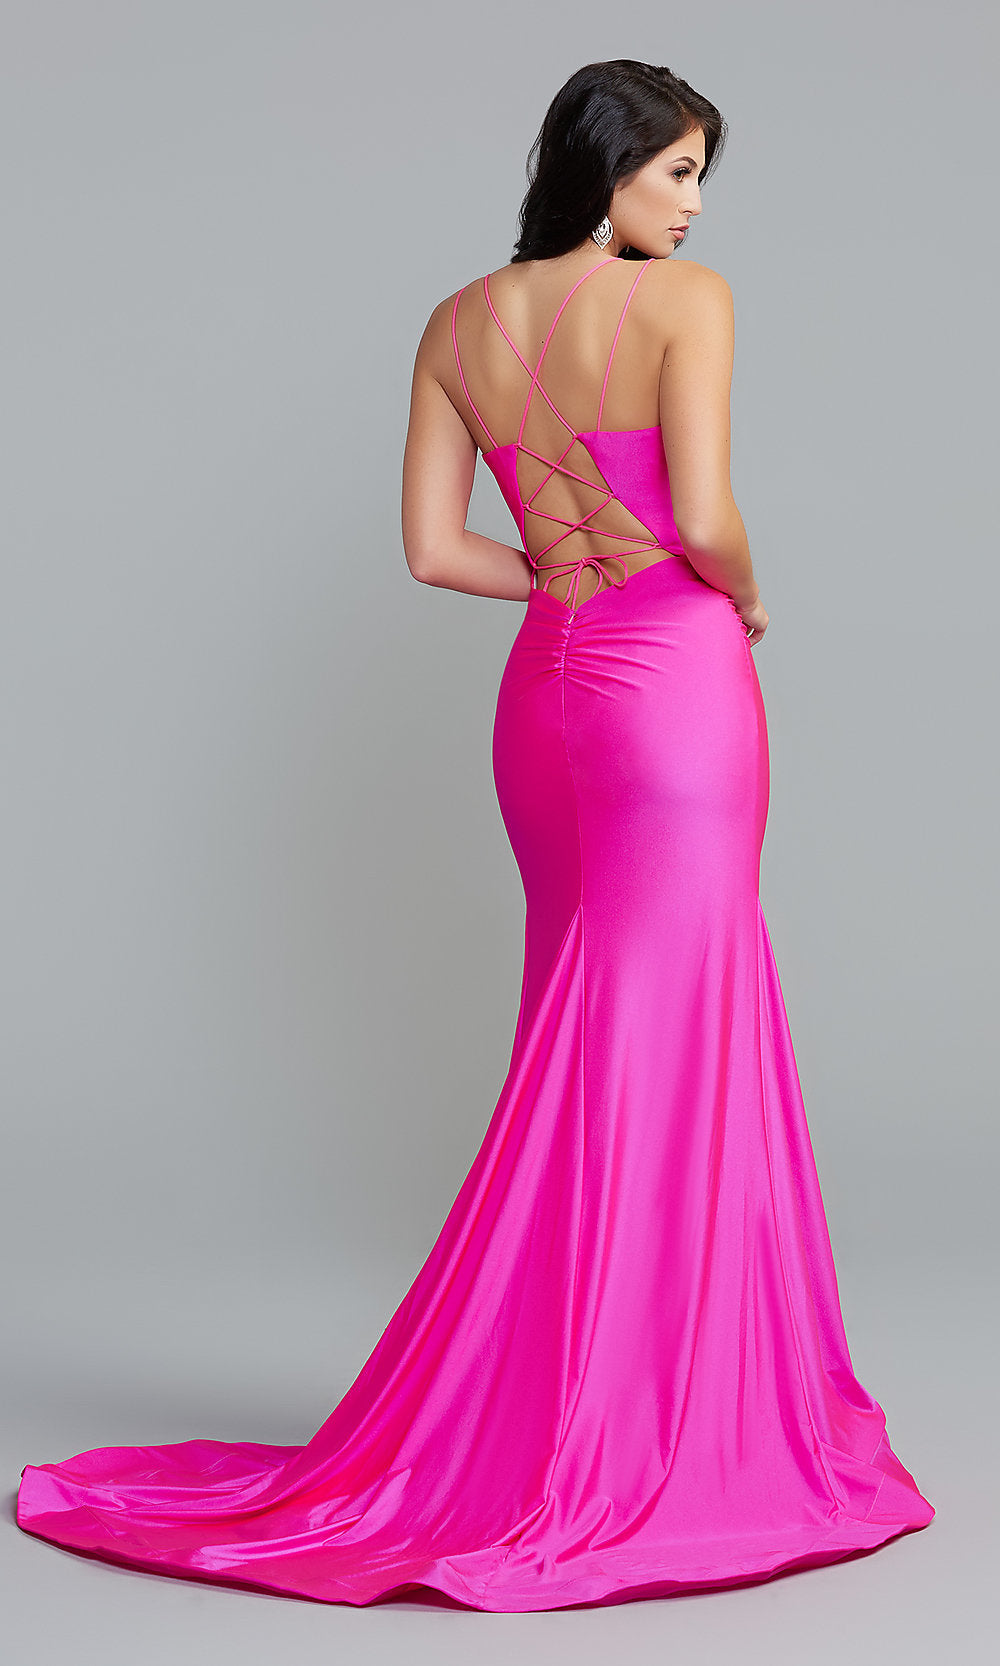  Neon Pink Long Prom Dress with Corset Back